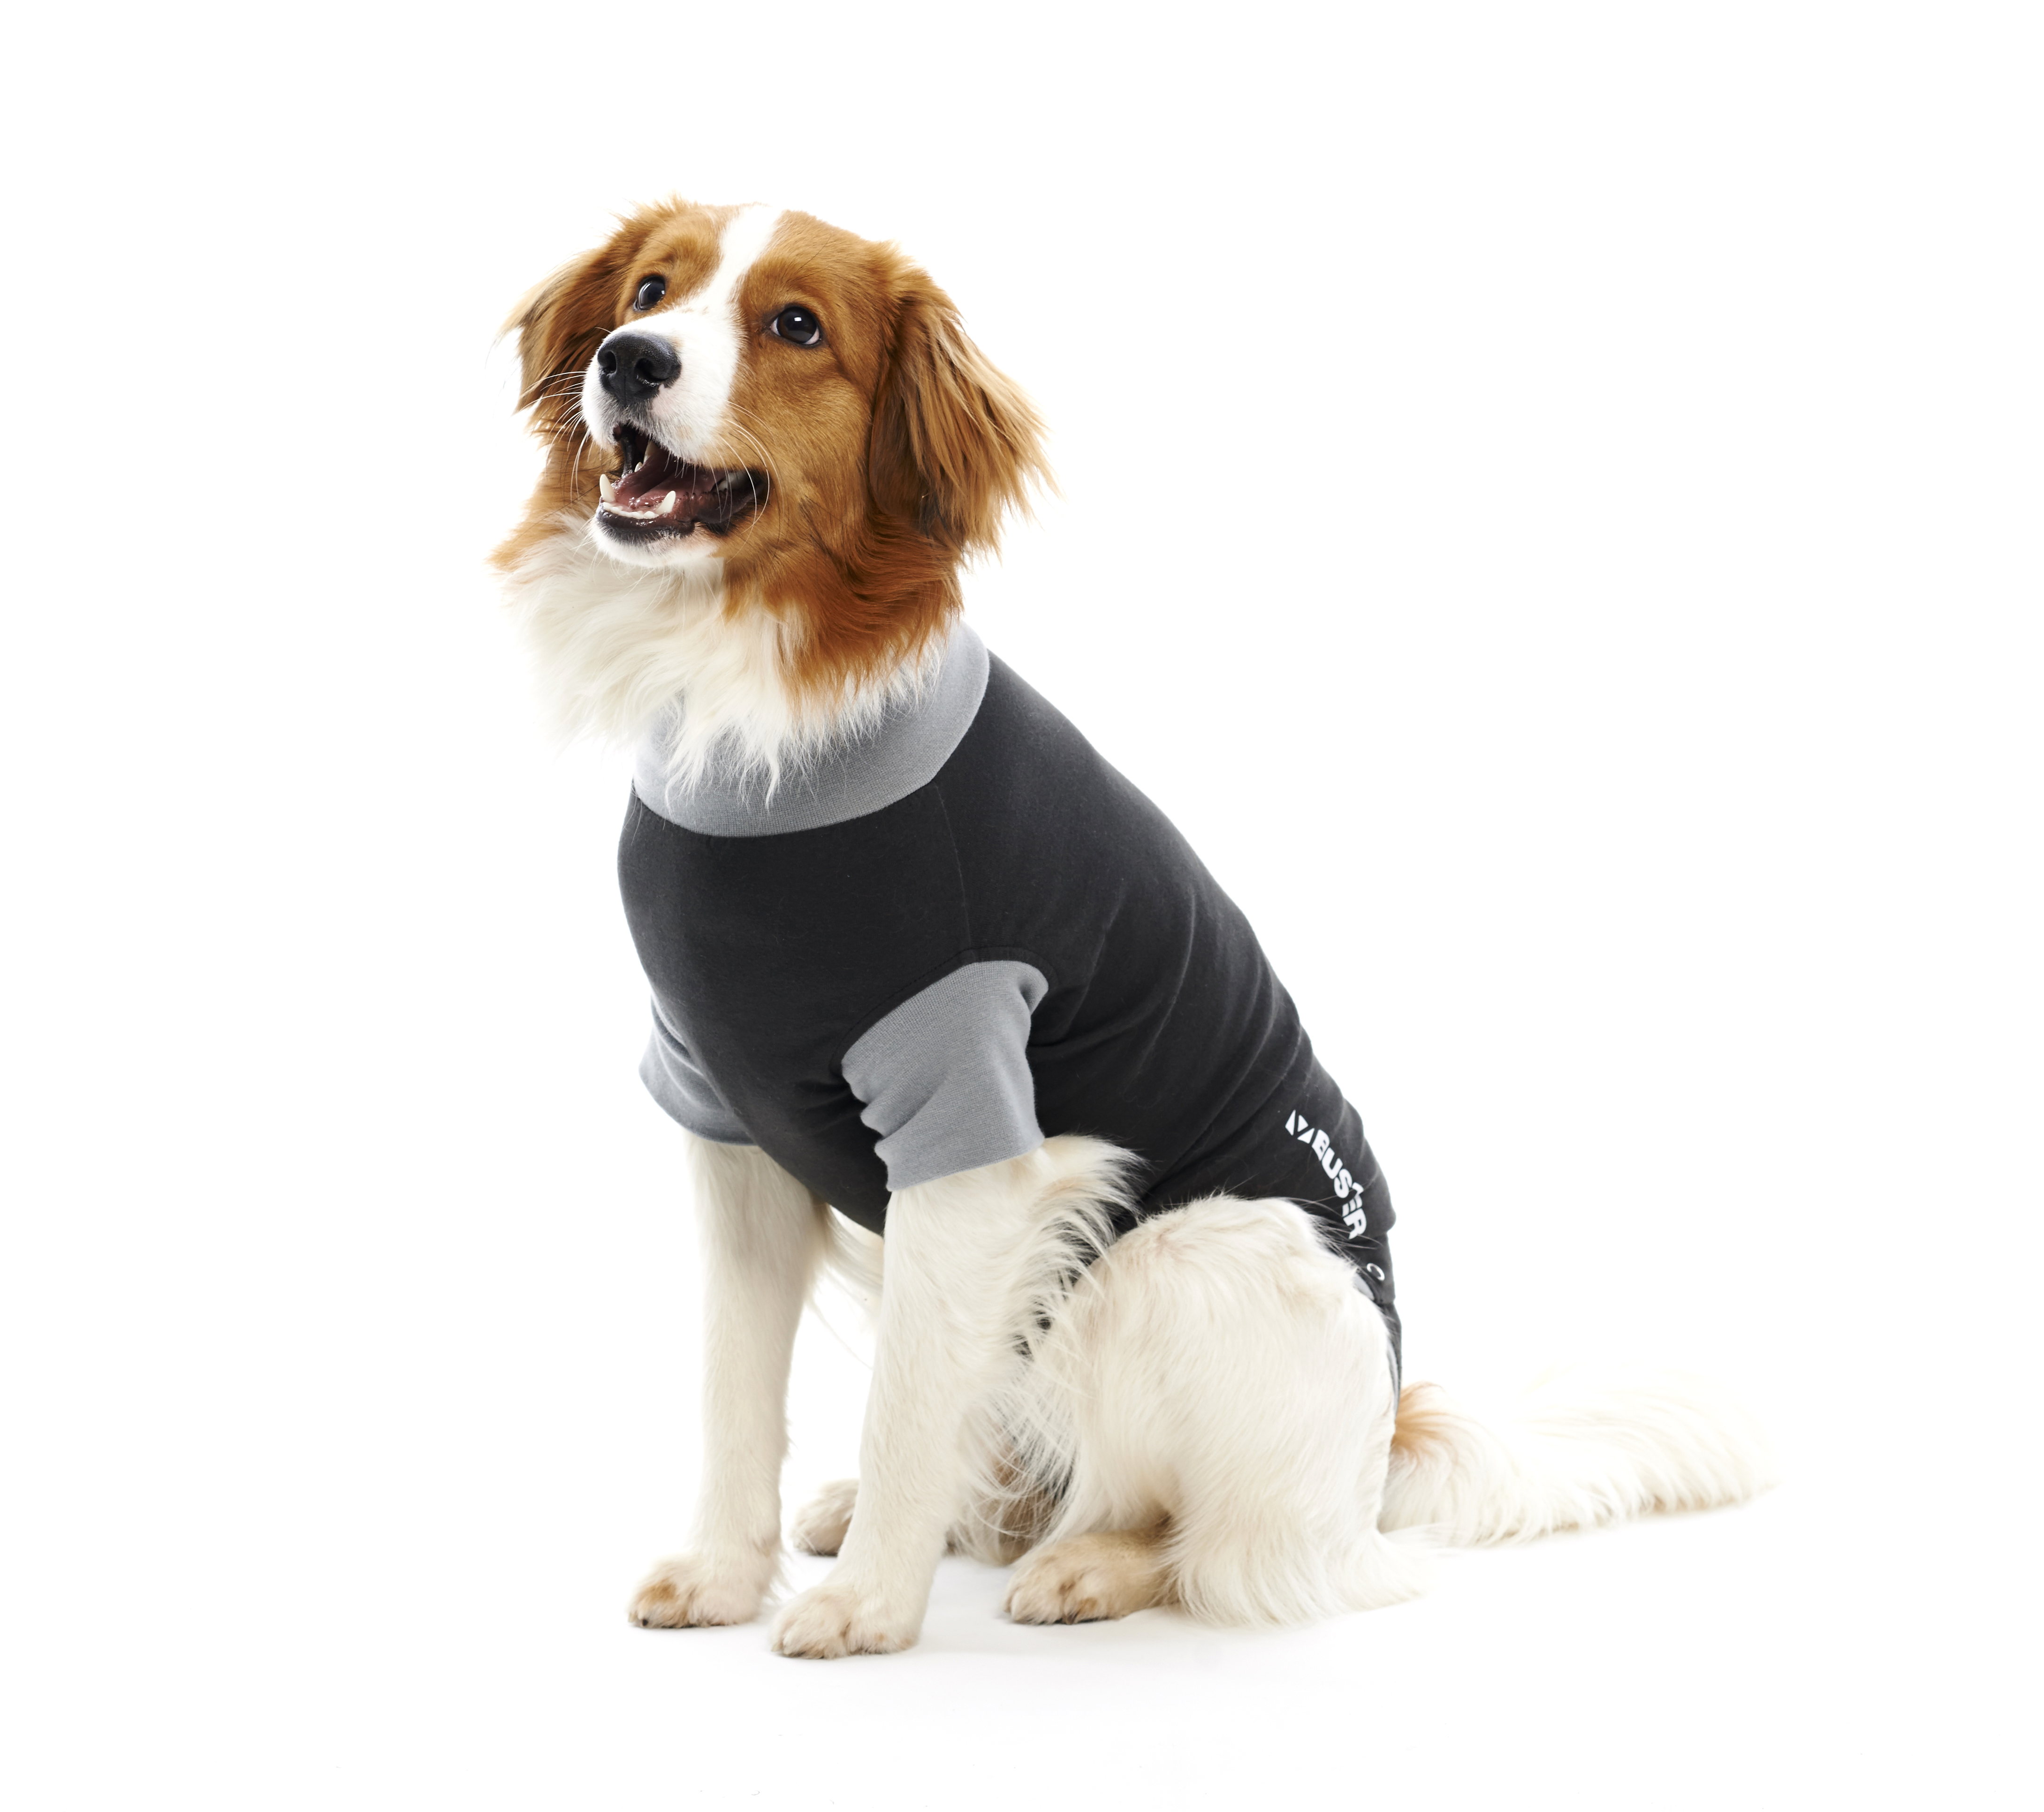 BUSTER Body Suit Classic for dogs, black/grey, 42 cm, str. S